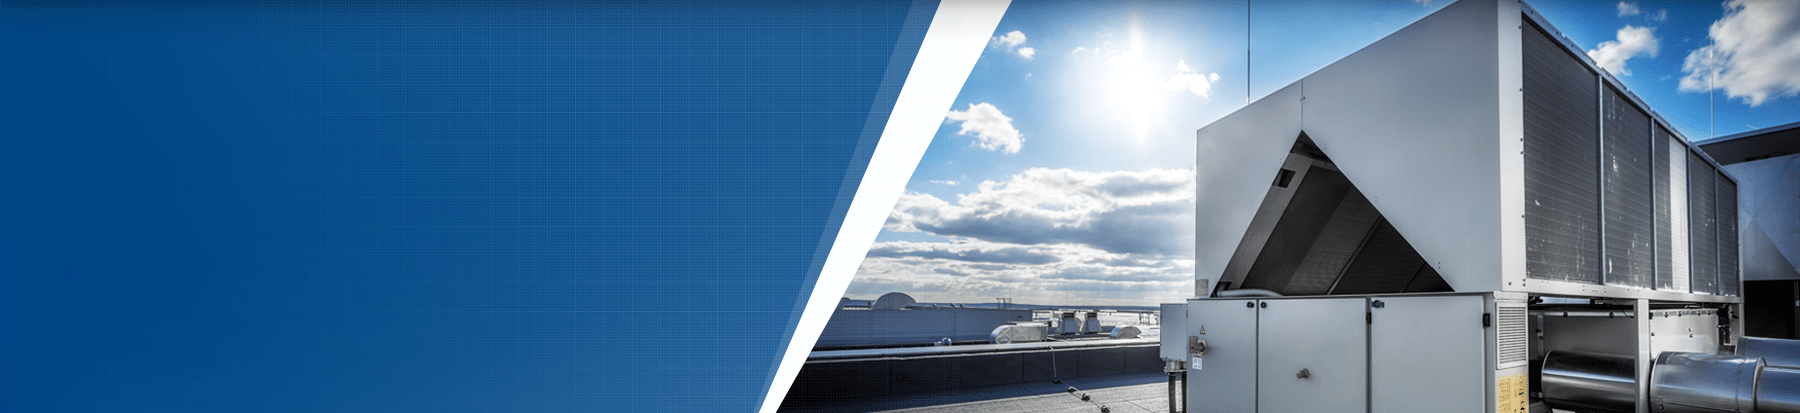 facilityACxe header image with a roof top unit and skyline.